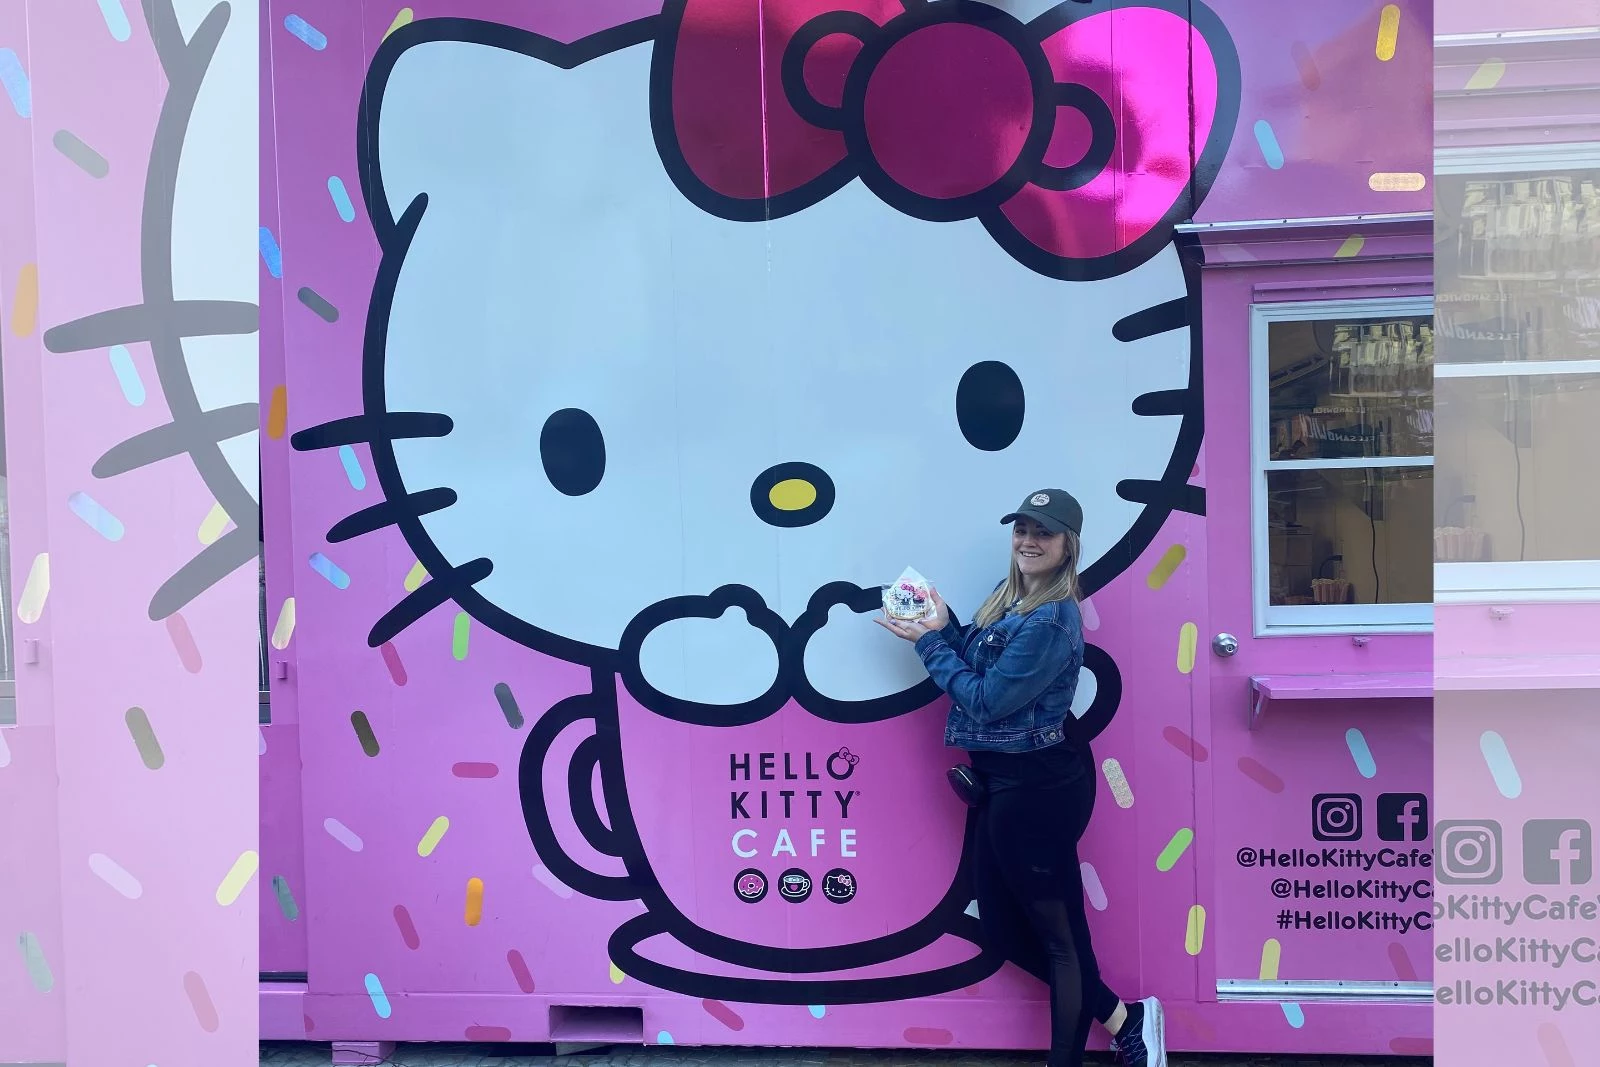 The outside of the Hello Kitty Cafe near New York New York Casino